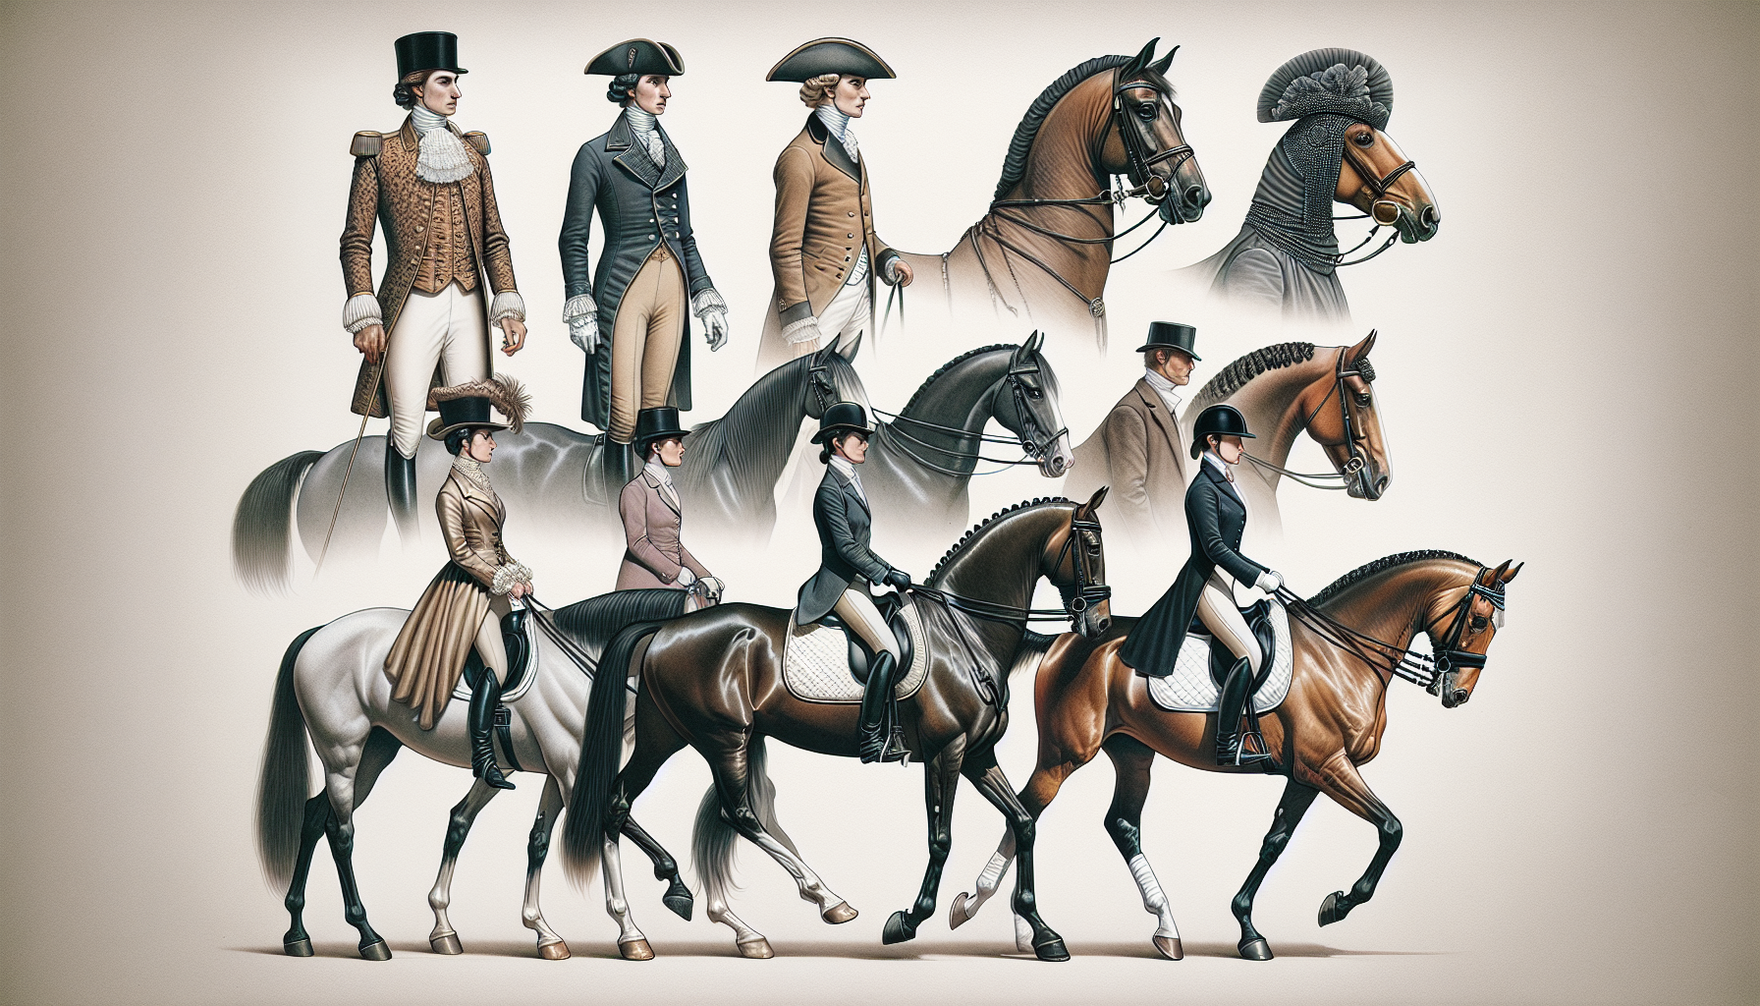 Visualize the evolution of equestrian style from the past to the present. On the left side of the artwork, show a rider outfitted in historical riding garments such as a high-collared coat, tall boots